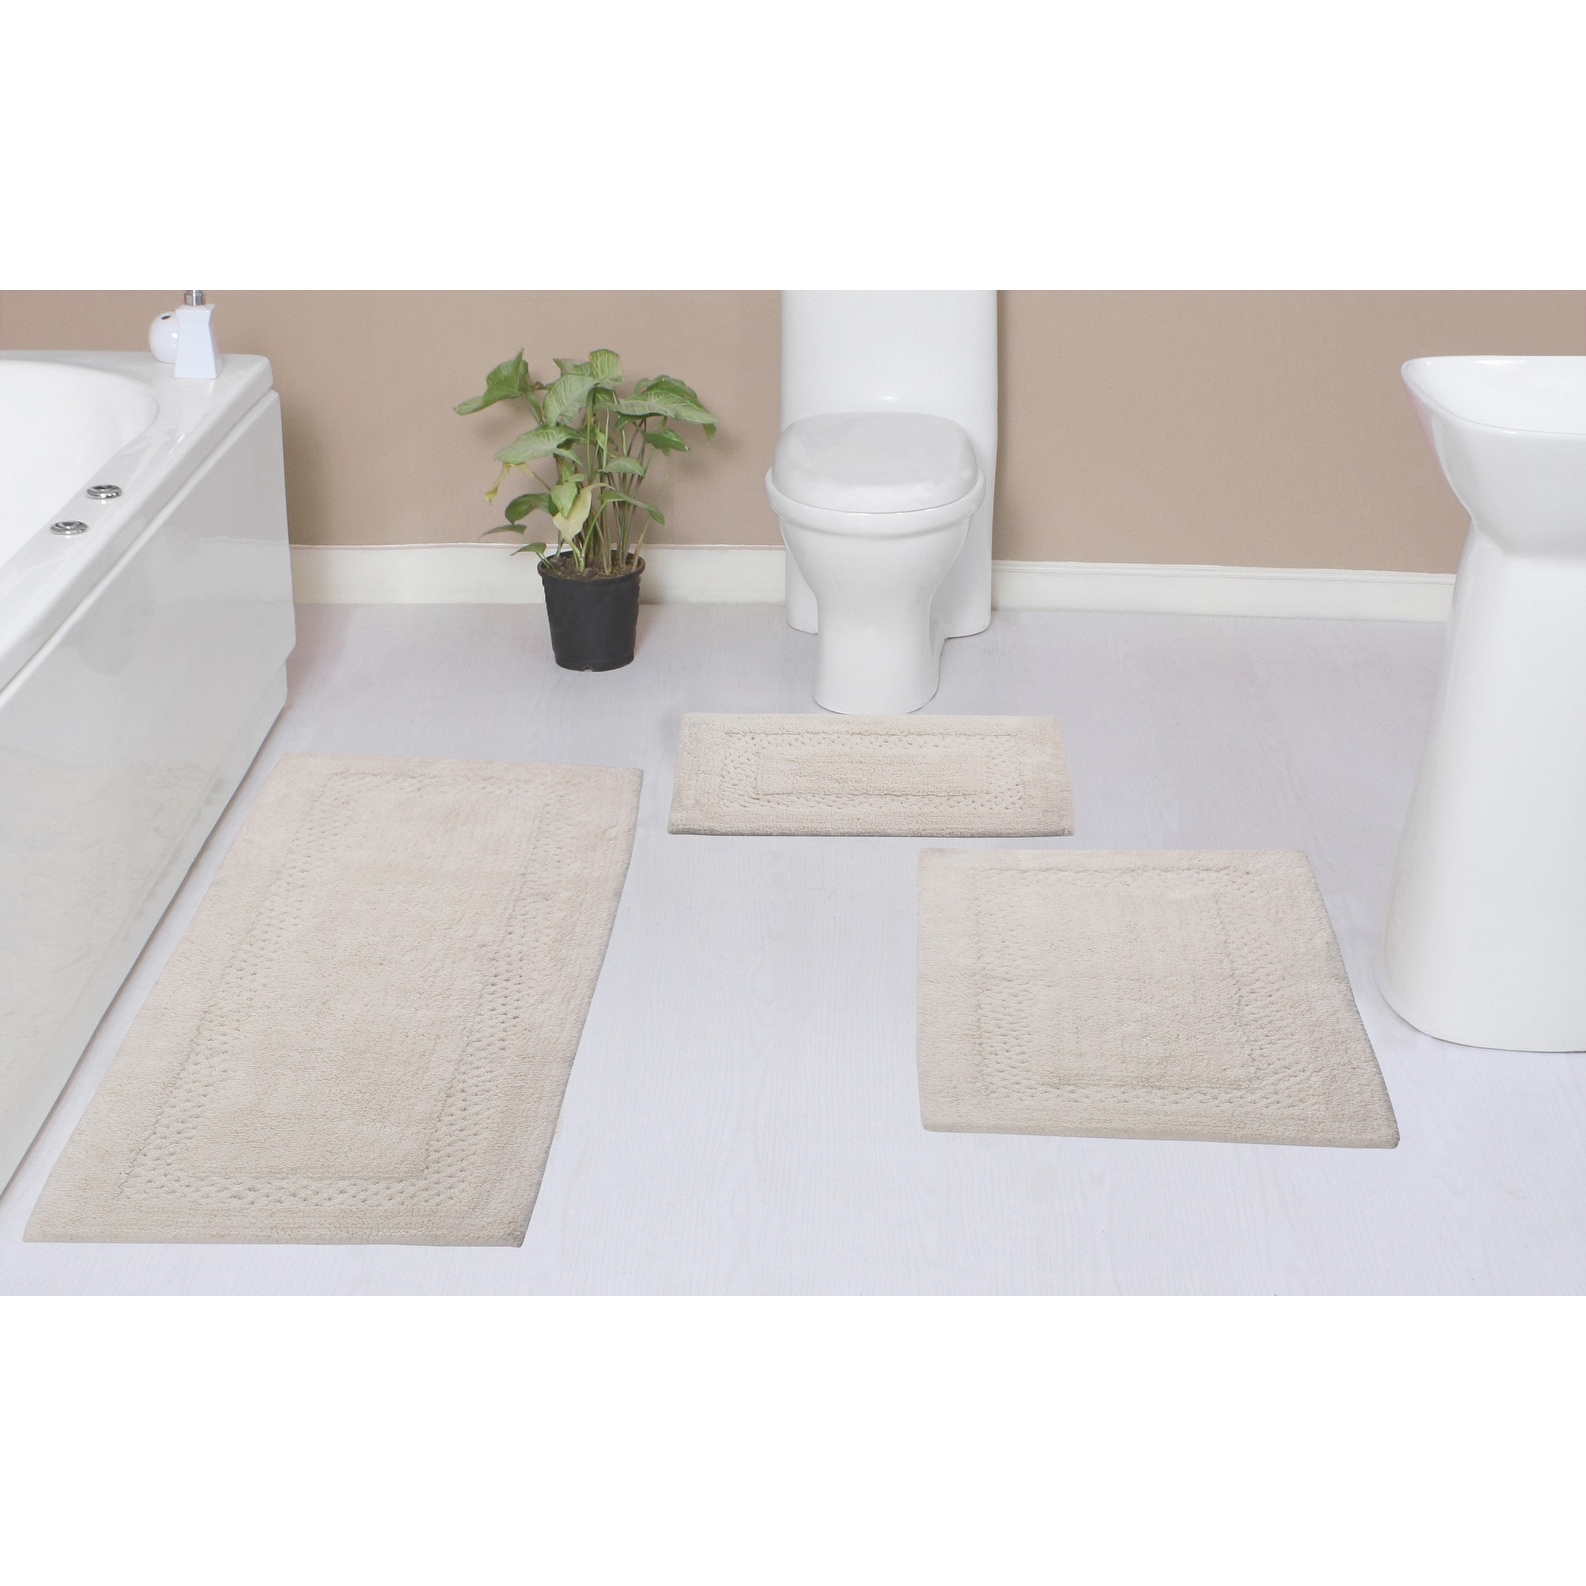 https://ak1.ostkcdn.com/images/products/is/images/direct/181987e3d8fd4d8a03065aba4086abae44f48c3b/Home-Weavers-Classy-Bathmat-Absorbent-Cotton-3-Piece-Set-Machine-Washable-Bath-Rug-with-Runner-17%22x24%22%2C-21%22x34%22%2C-21%22x54%22.jpg